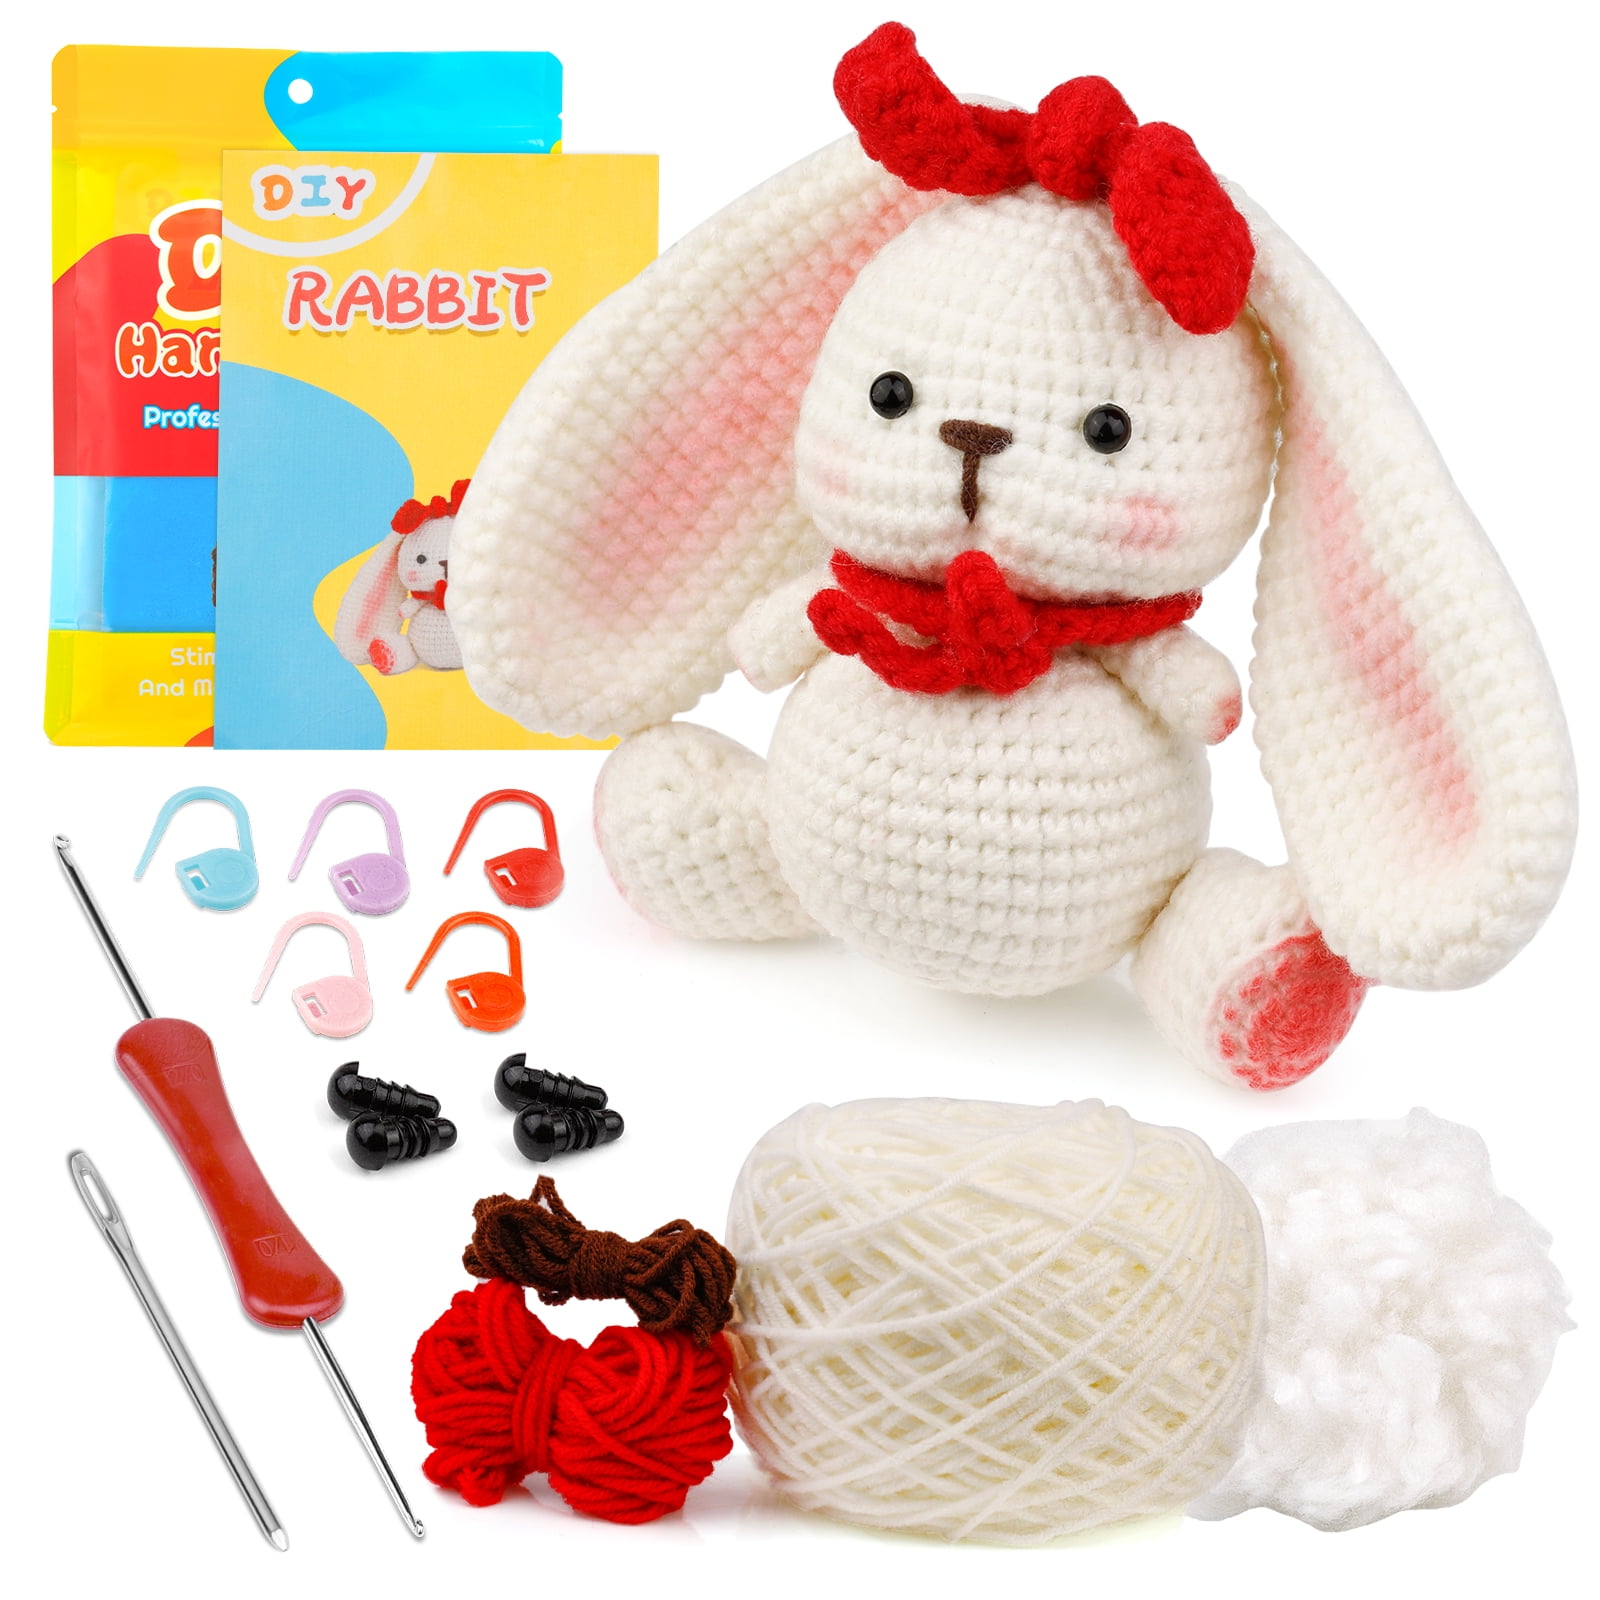 LuNuaFvy Crochet Kits for Beginners Adults Kids,Easy Knitting Yarn for  Starter,animail amigurumi Gift,Step-by-Step Video Tutorials